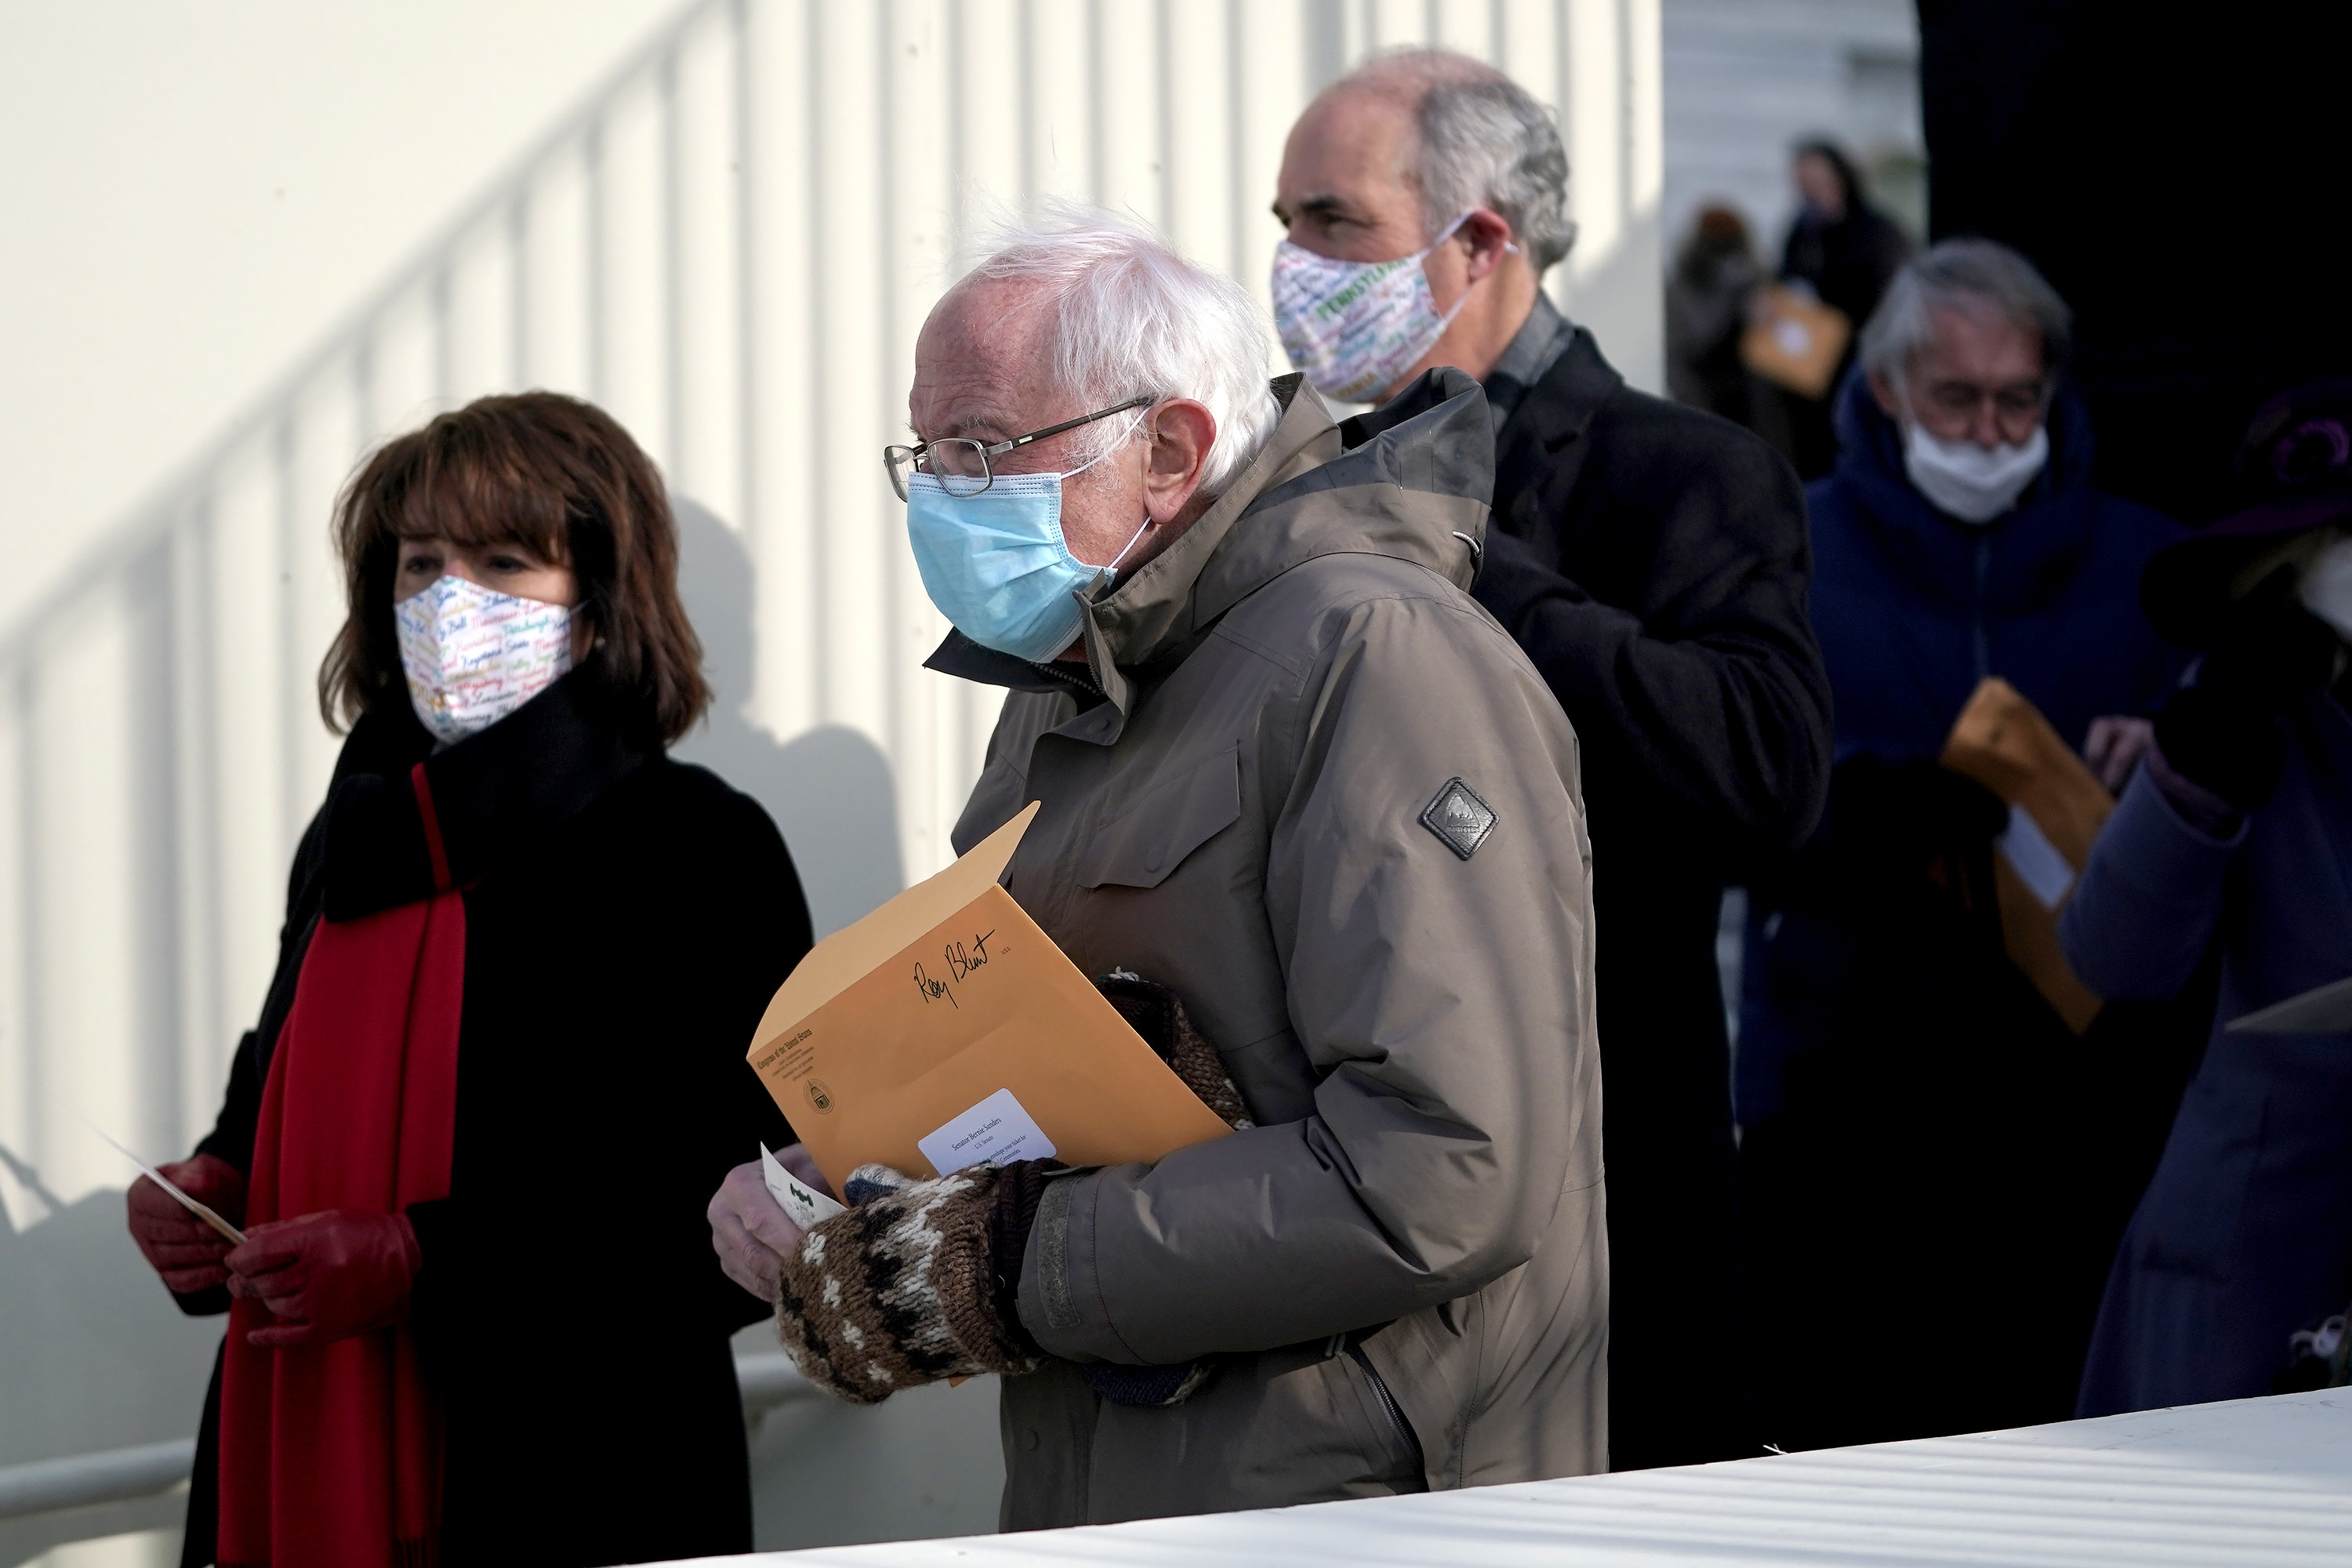 Sen. Bernie Sanders is seen prior to the Presidential Inauguration carrying a manilla folder